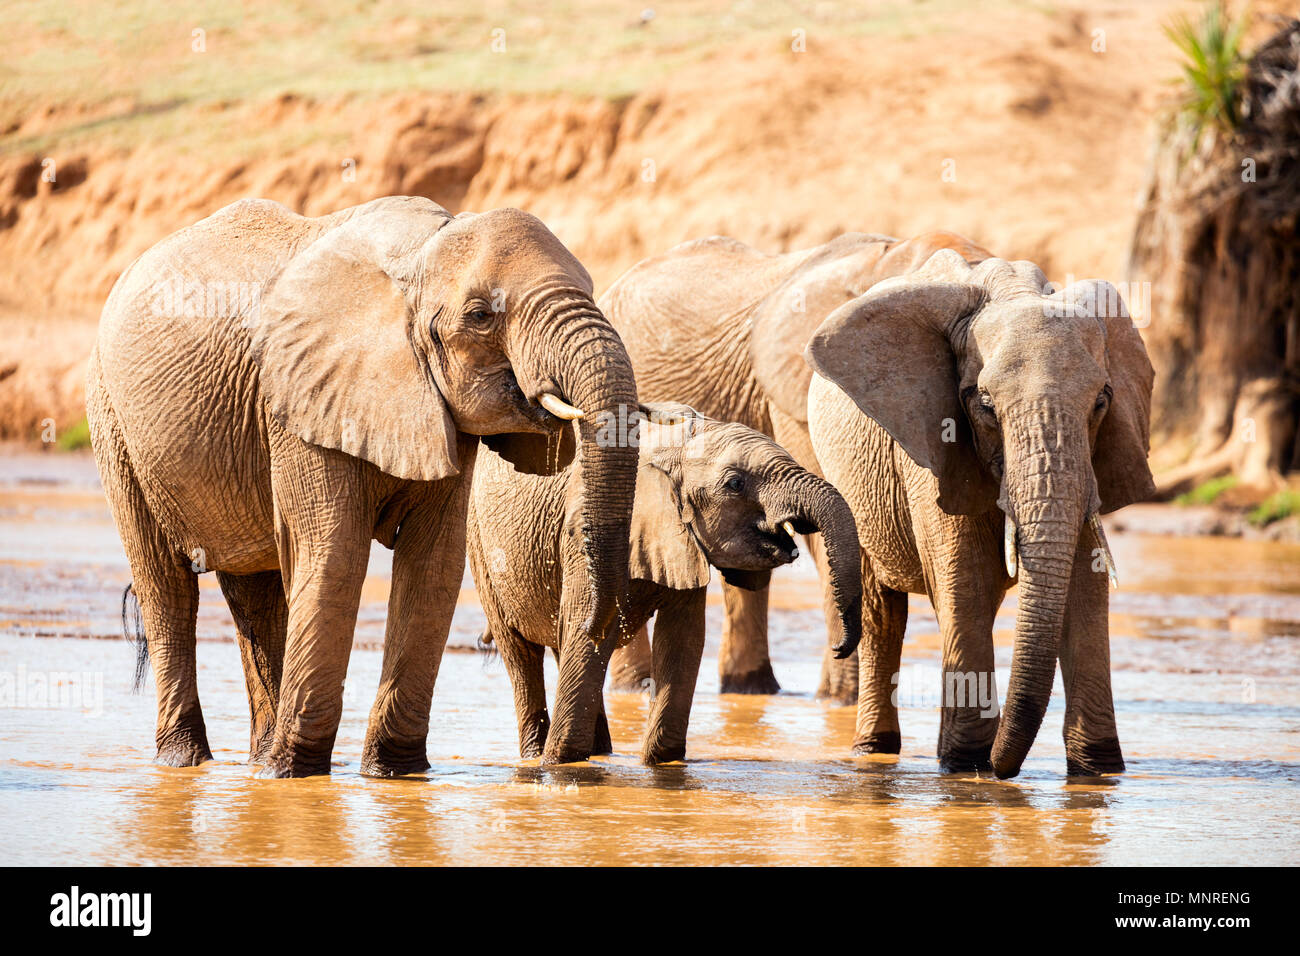 Wild elephants at riverbed drinking water Stock Photo